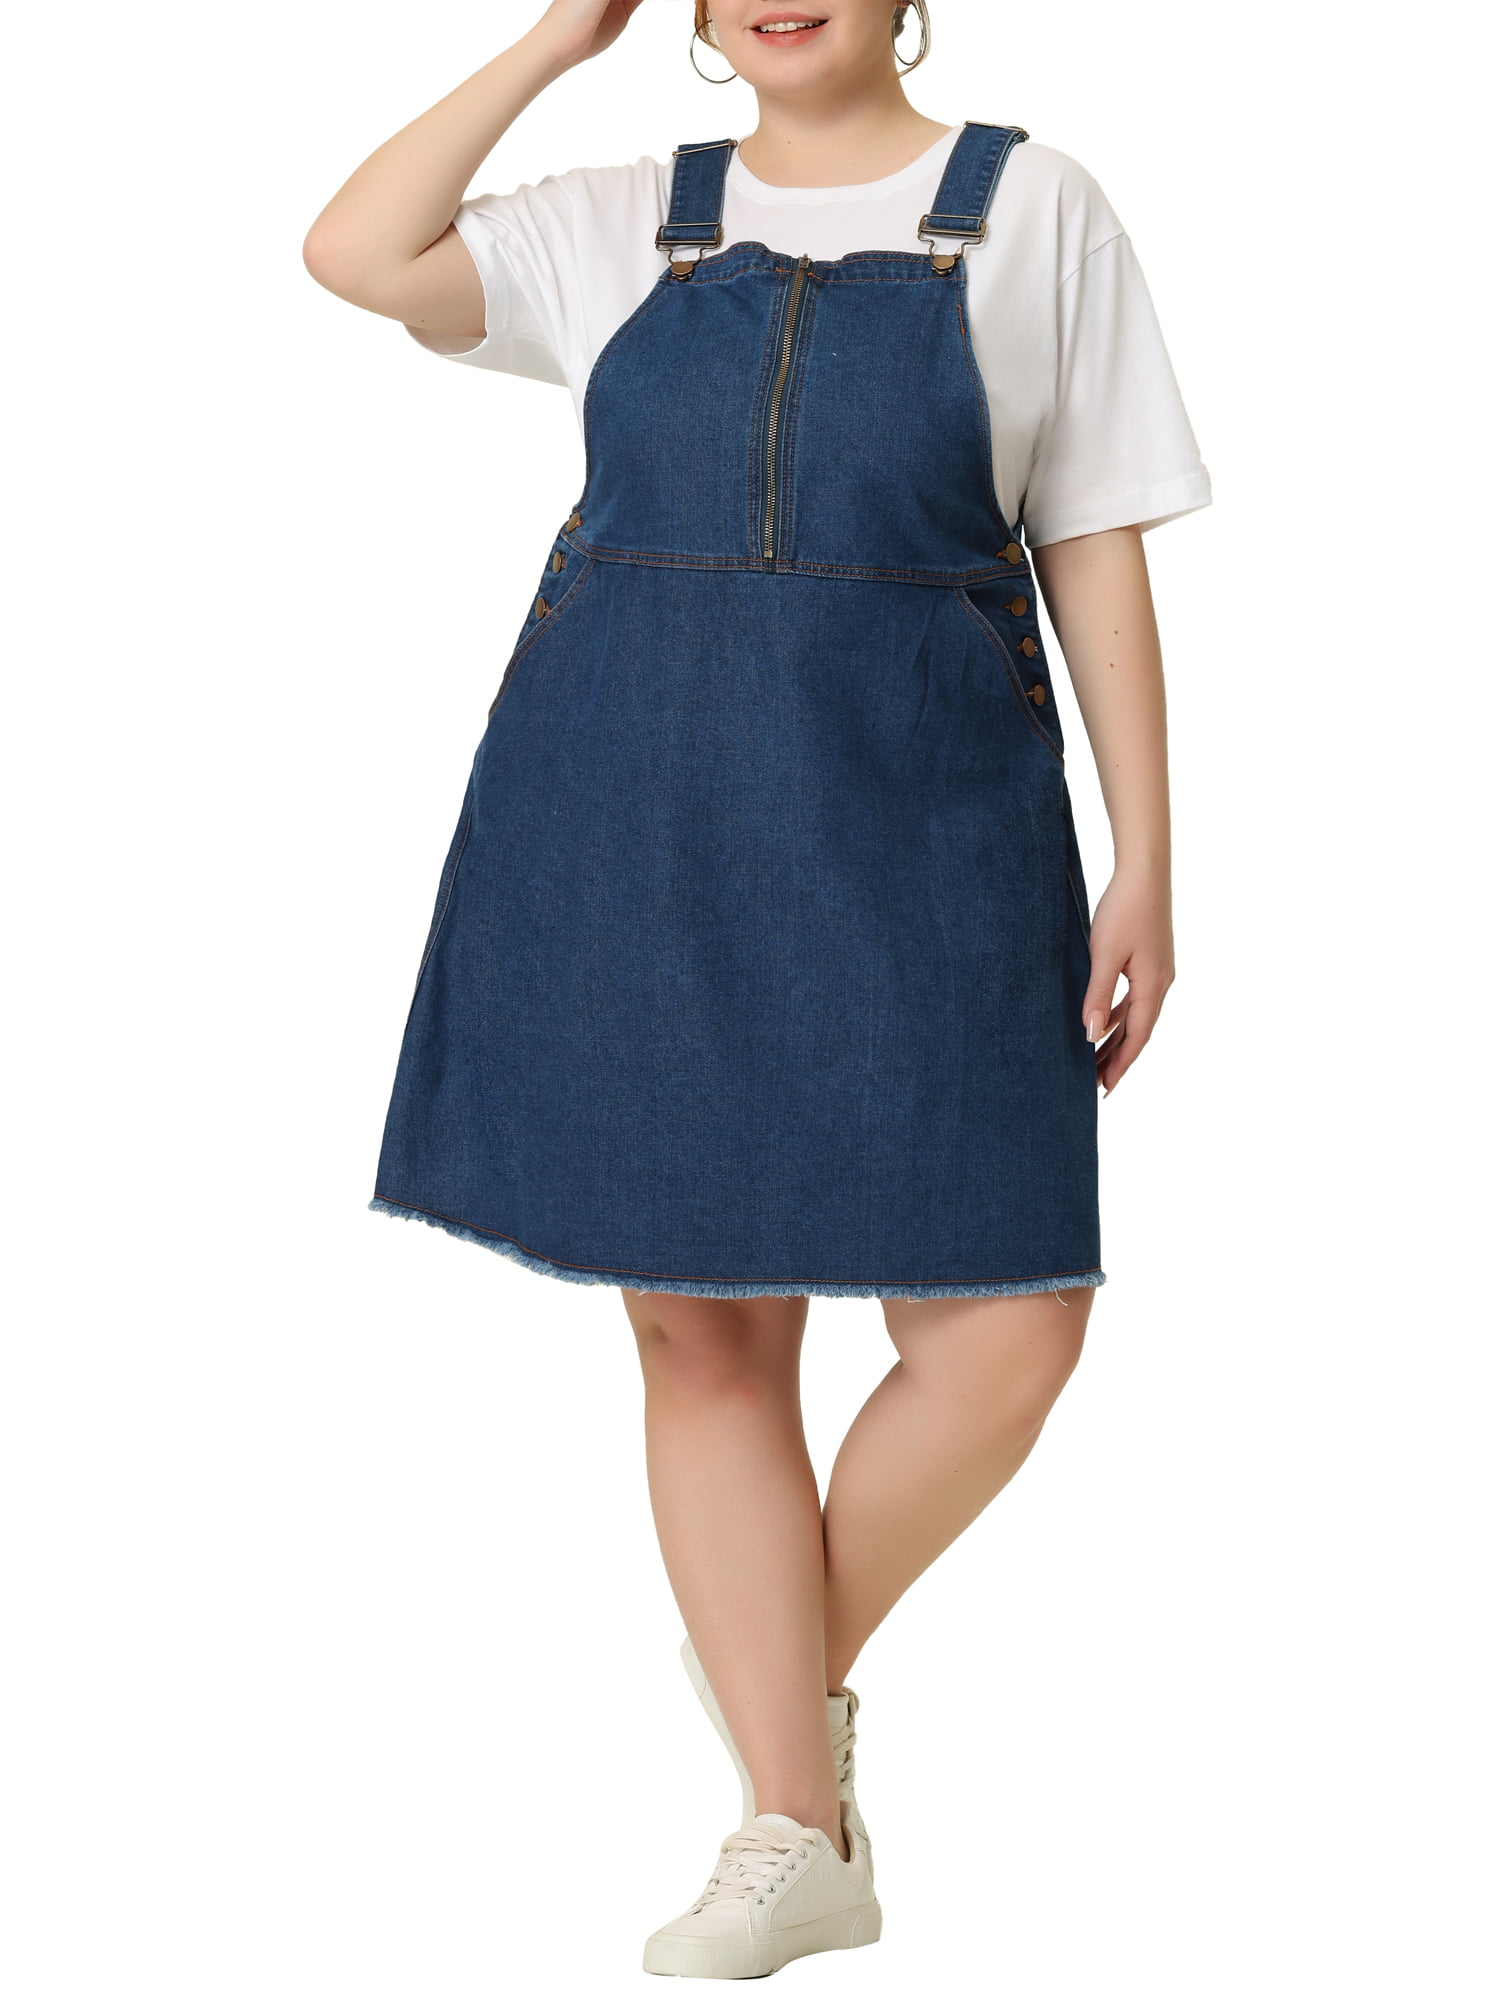 Top more than 118 plus size denim overall skirt best